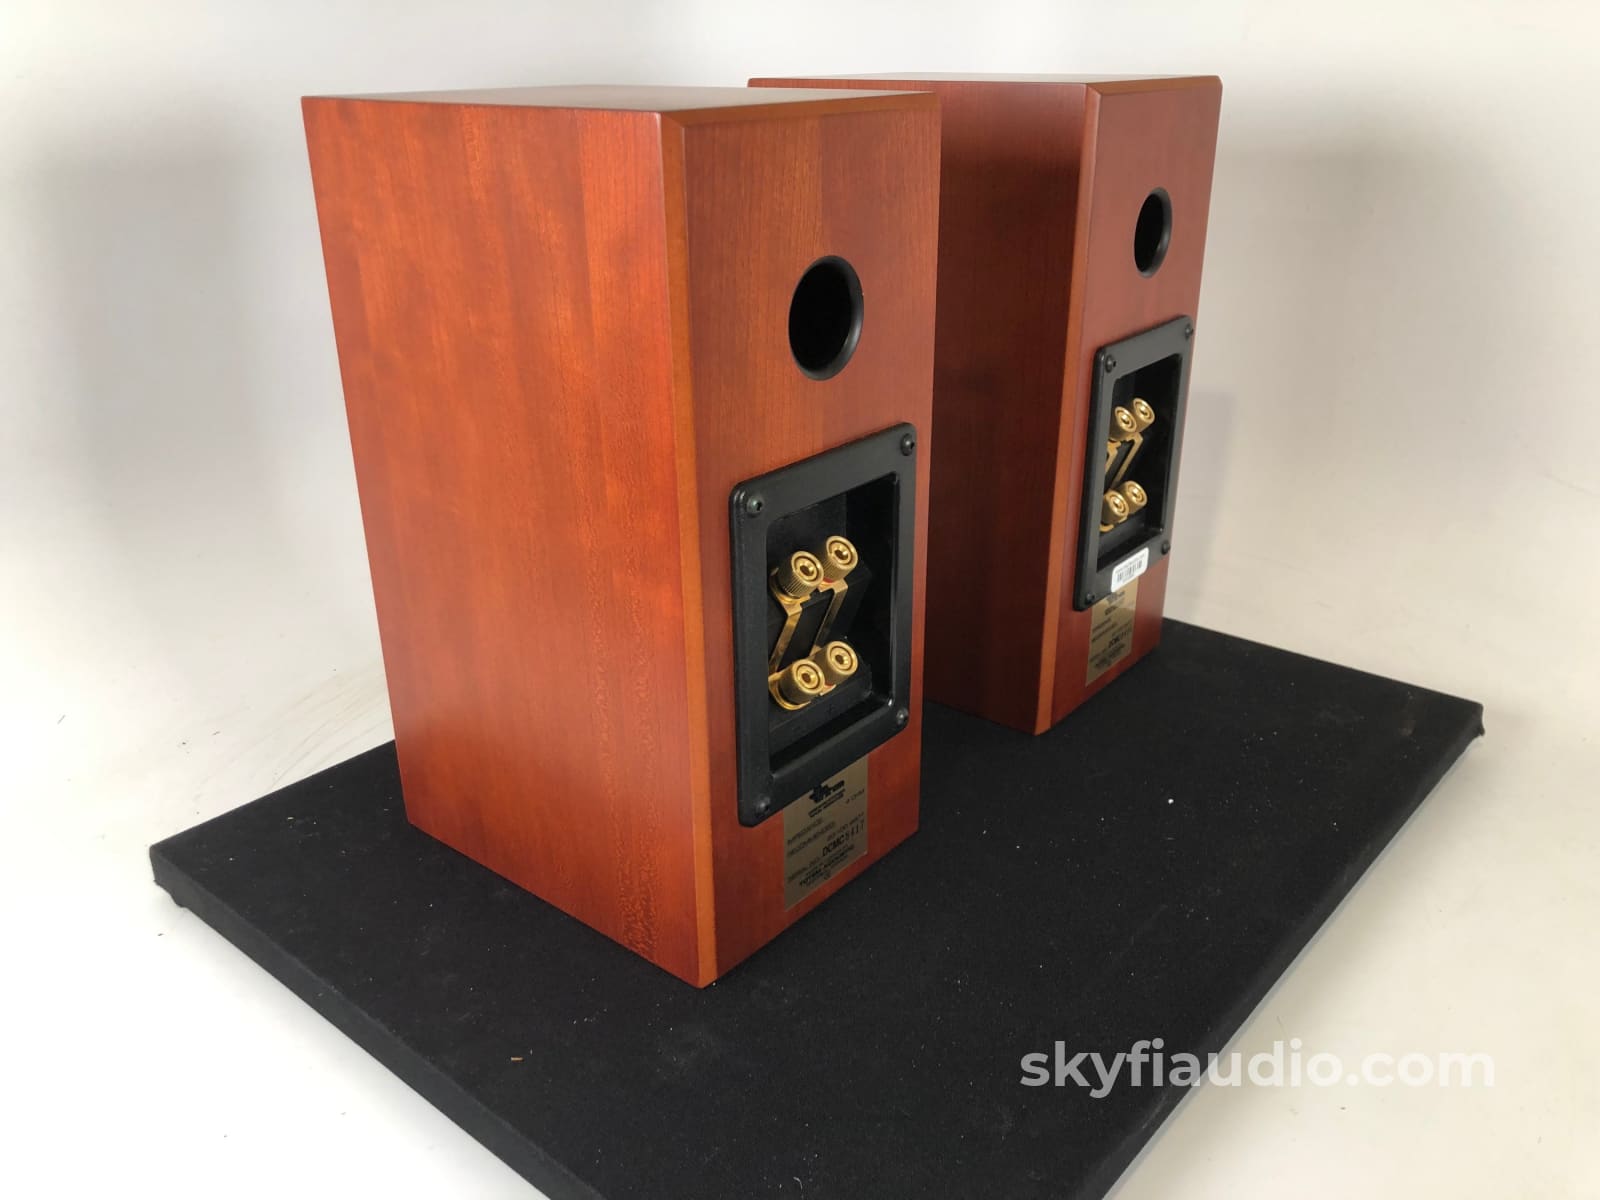 Totem Acoustic Dreamcatcher Main Monitor Speakers